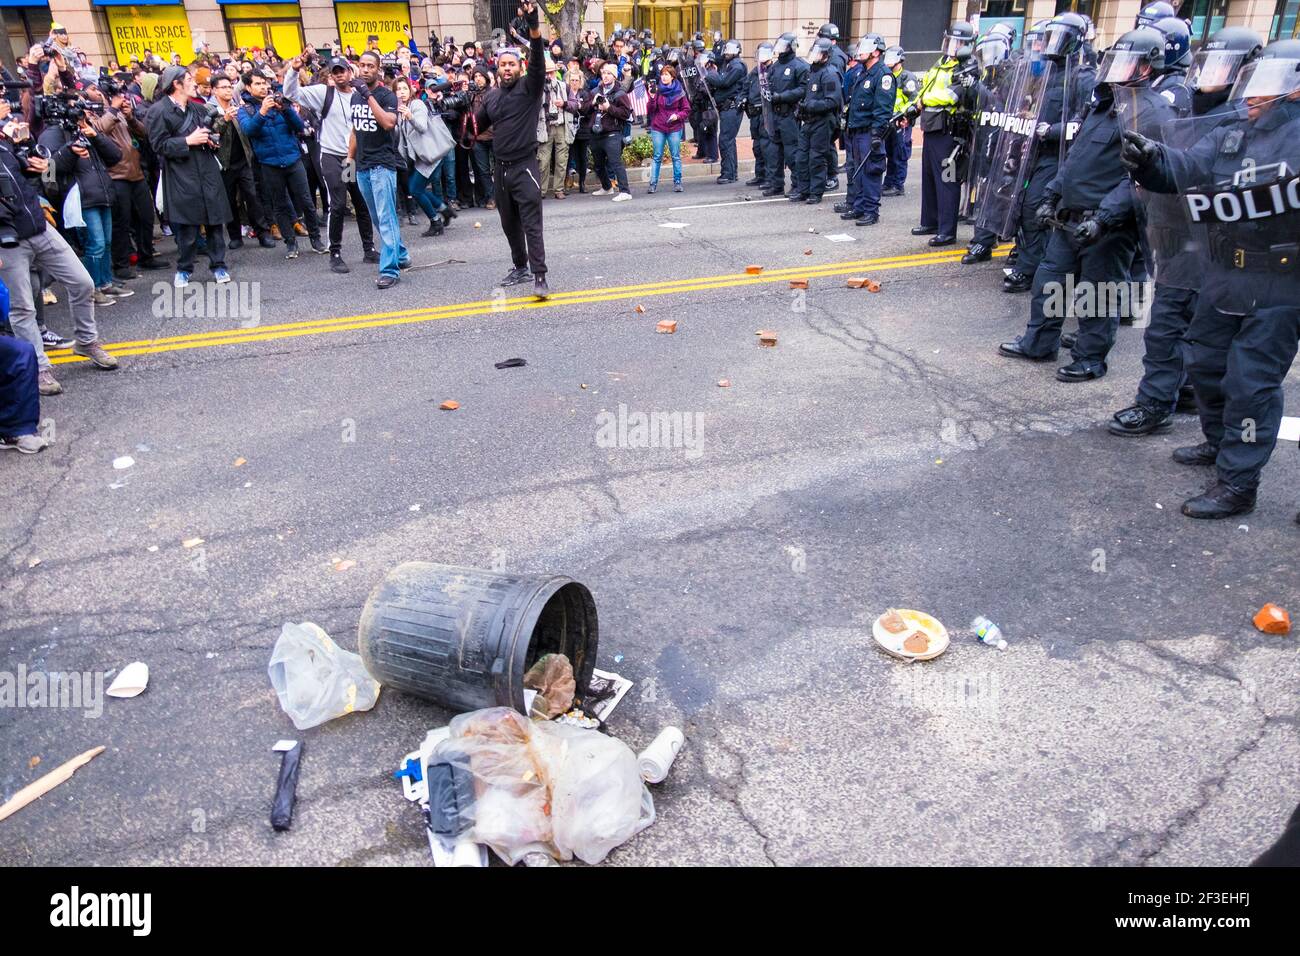 Riot police and protestors with trash on the street. At President Donald Trump's 2017 inaguration in Washington D.C. Stock Photo